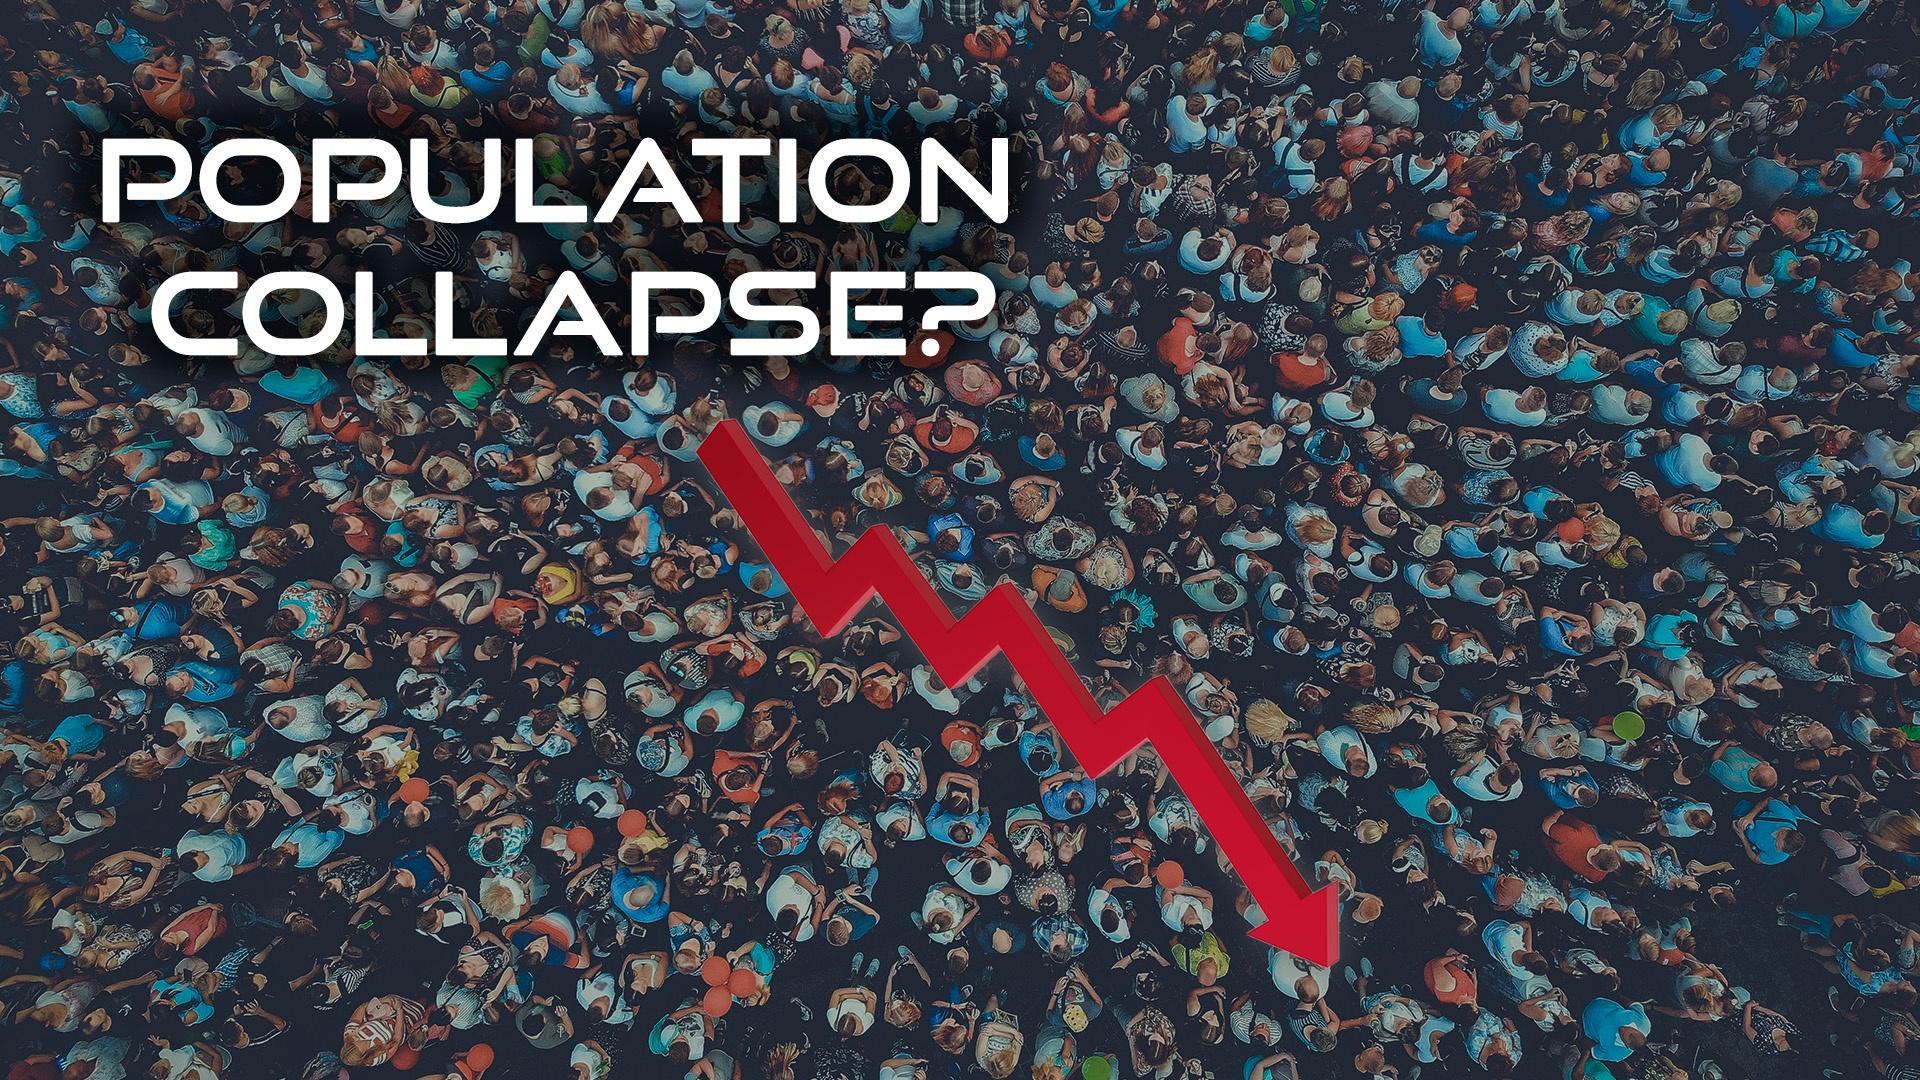 A birds-eye view of a large crowd of people with The text "POPULATION COLLAPSE?" and a downward arrow.